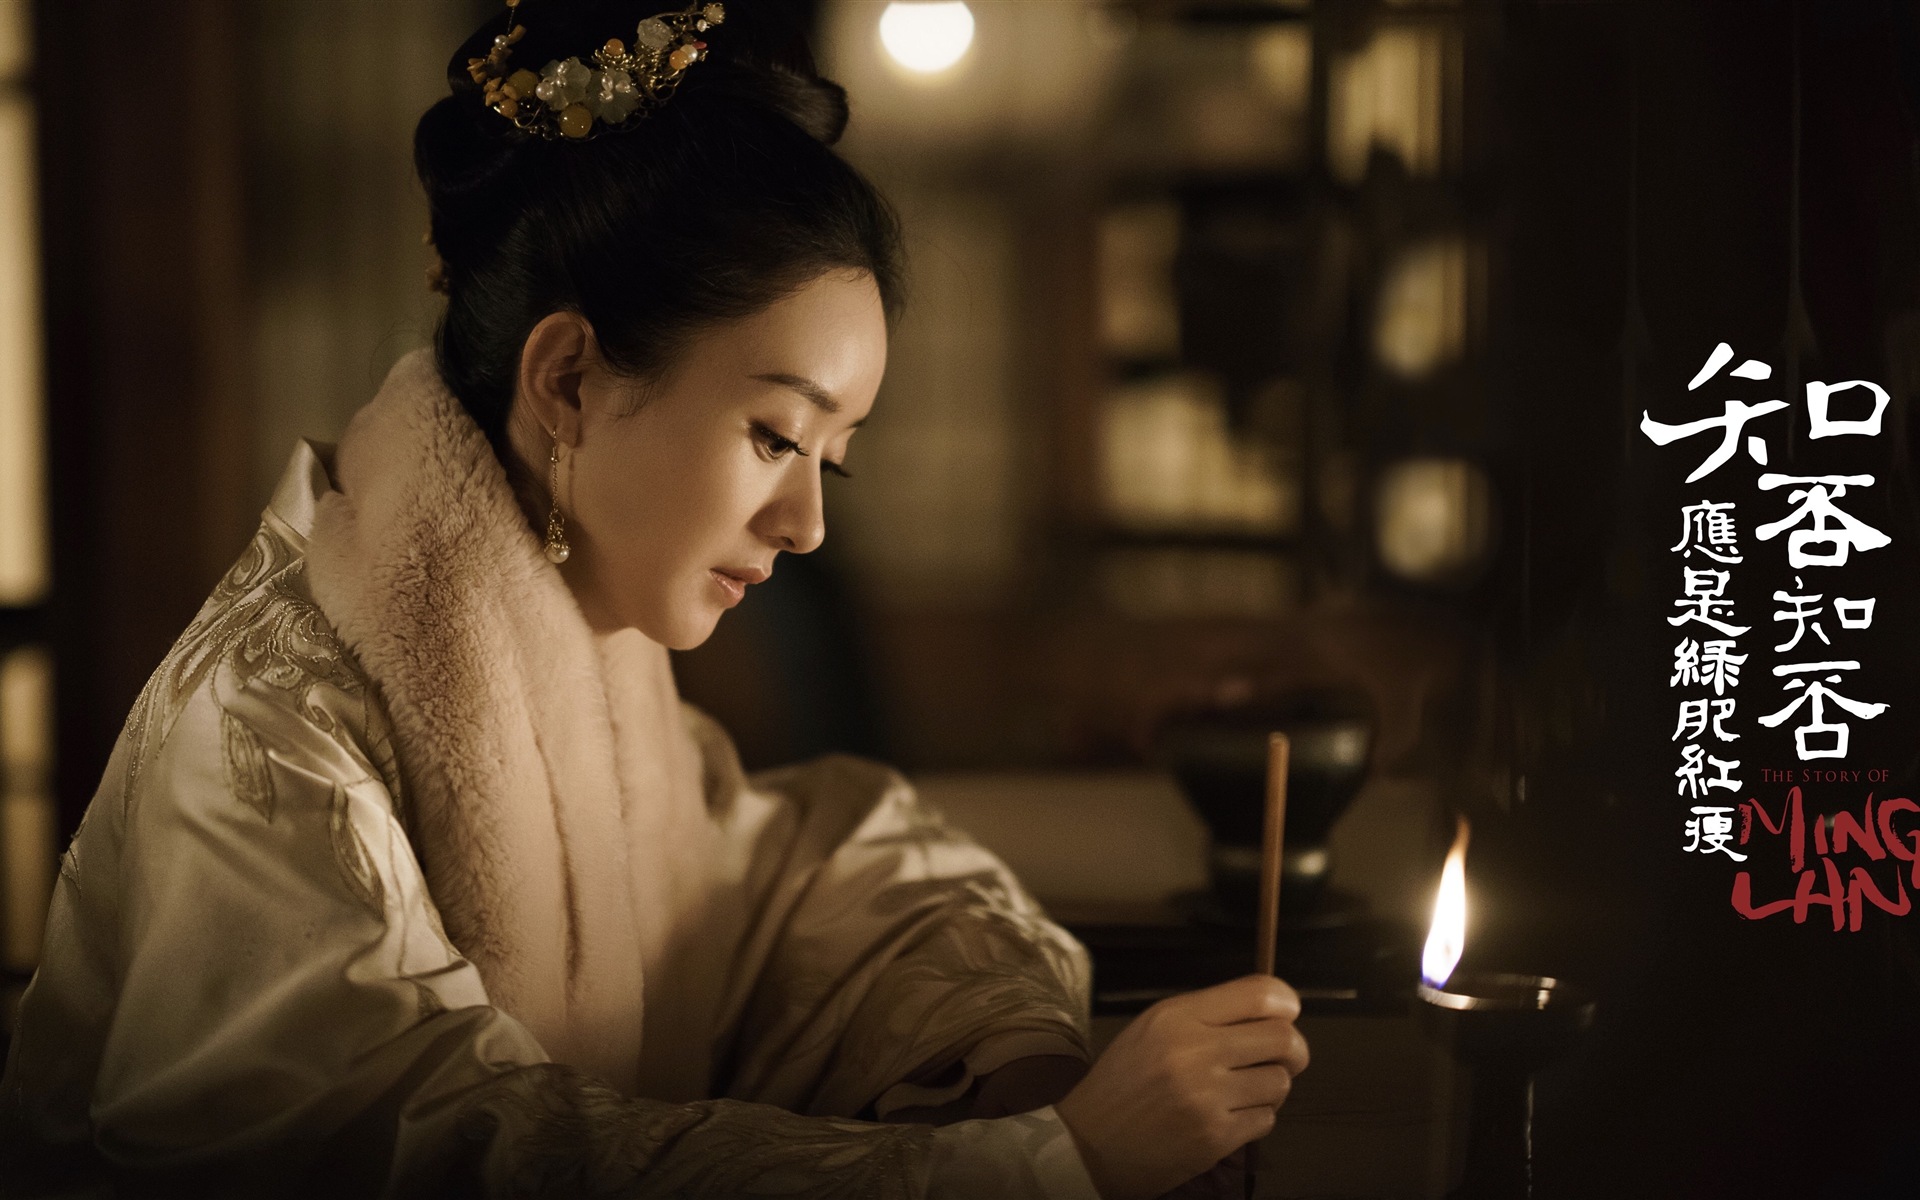 The Story Of MingLan, TV series HD wallpapers #26 - 1920x1200